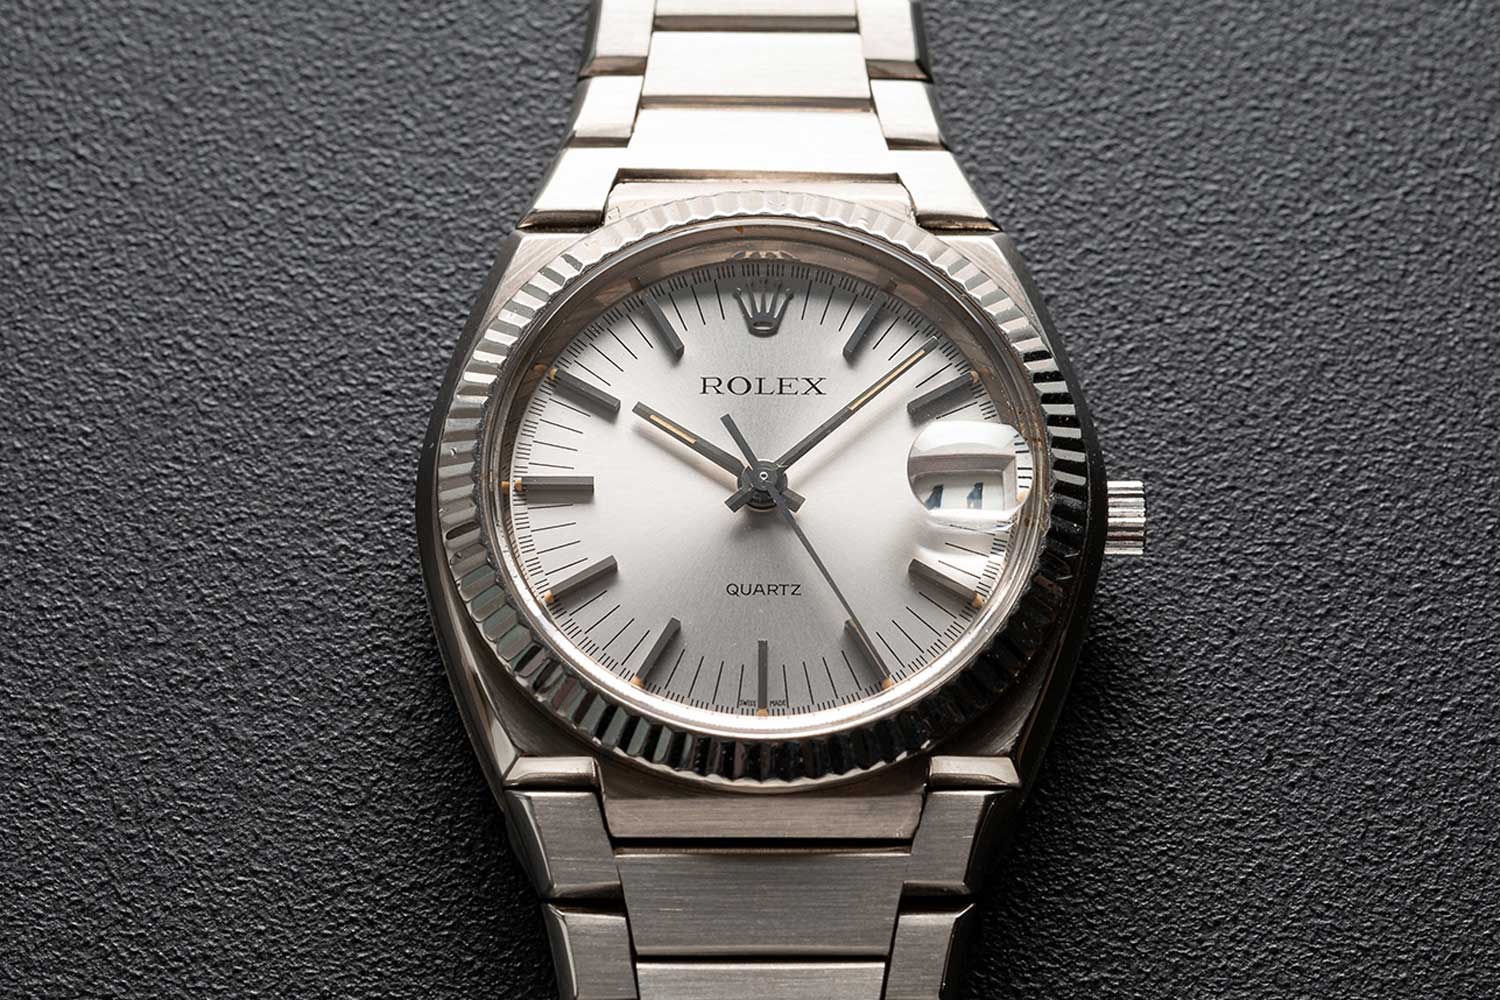 Lot 10: Rolex reference 5100, known as the Rolex Beta 21 sold for CHF 62,500 (Photo by Christopher Beccan, founder of @BEXSONN)